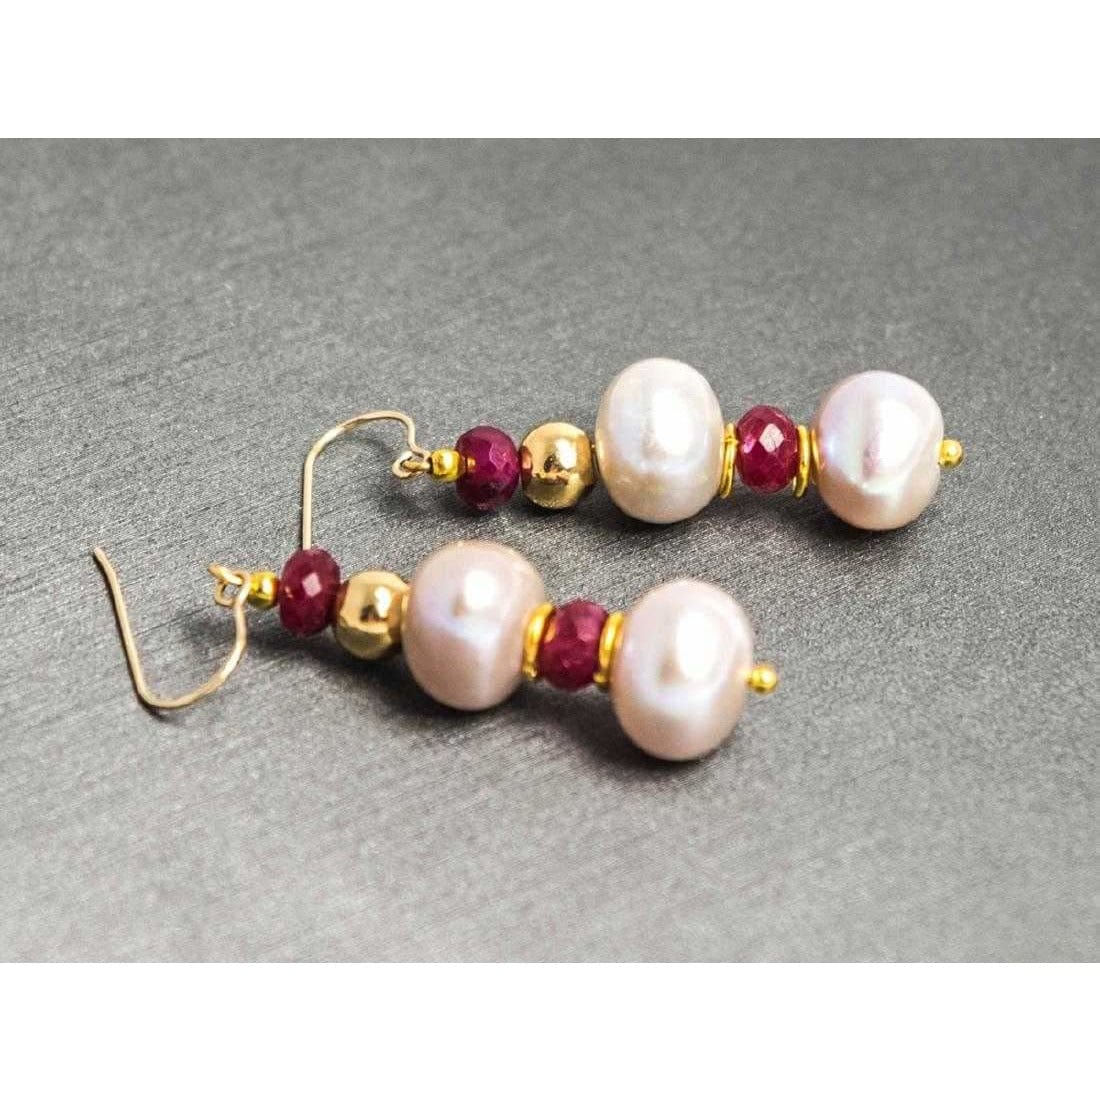 REGENZ Gemstone Earrings-Jade, Turquoise, Coral, Citrine, Pearls, Lapis HANDMADE with Love! - The Pink Pigs, A Compassionate Boutique